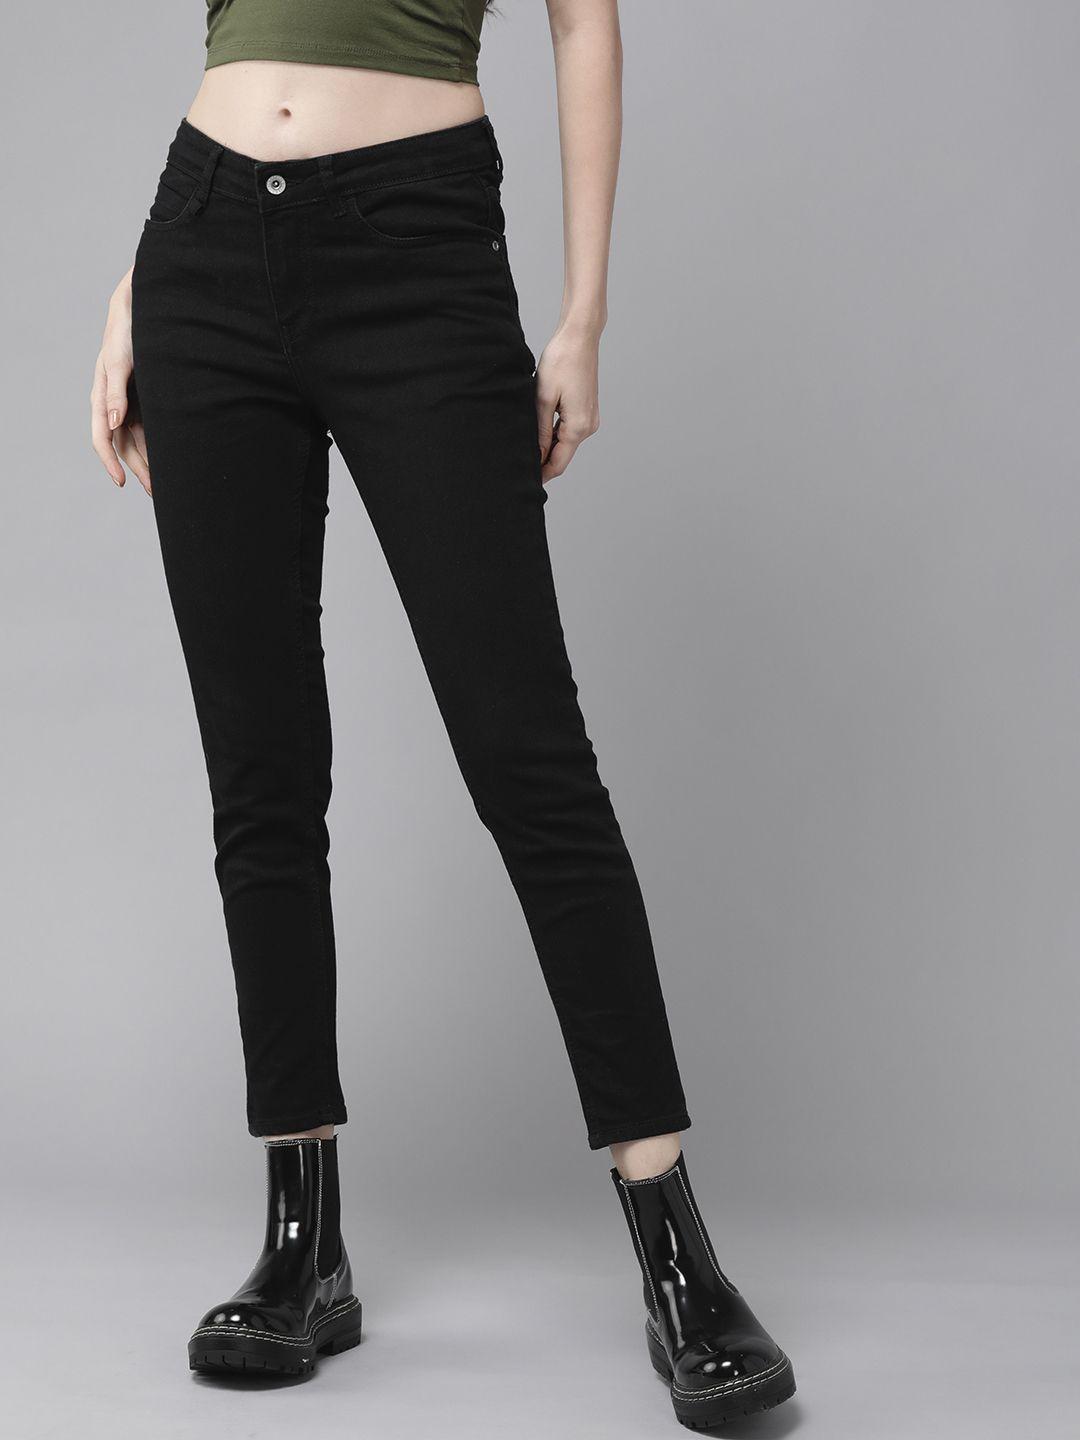 the roadster lifestyle co women black skinny fit mid-rise clean look stretchable jeans